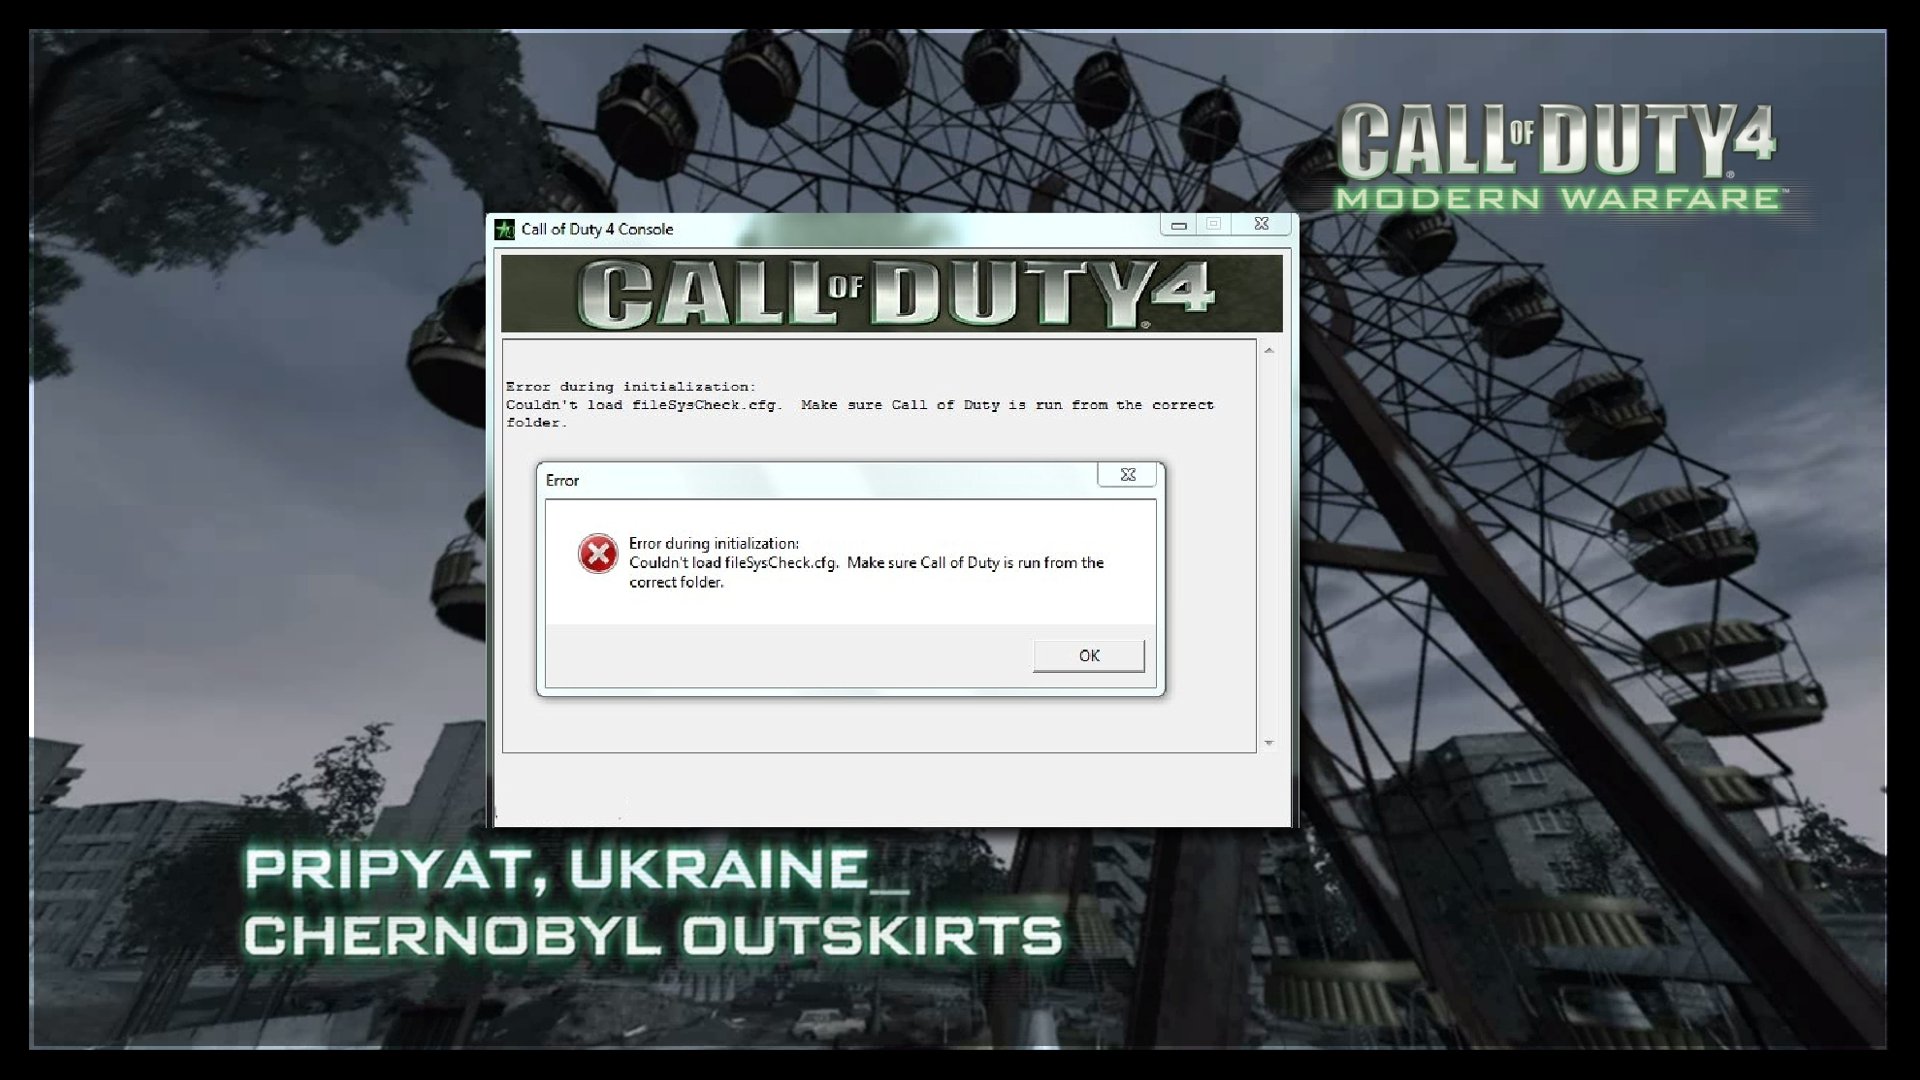 call of duty 4 pc iw3mp.exe has stopped working